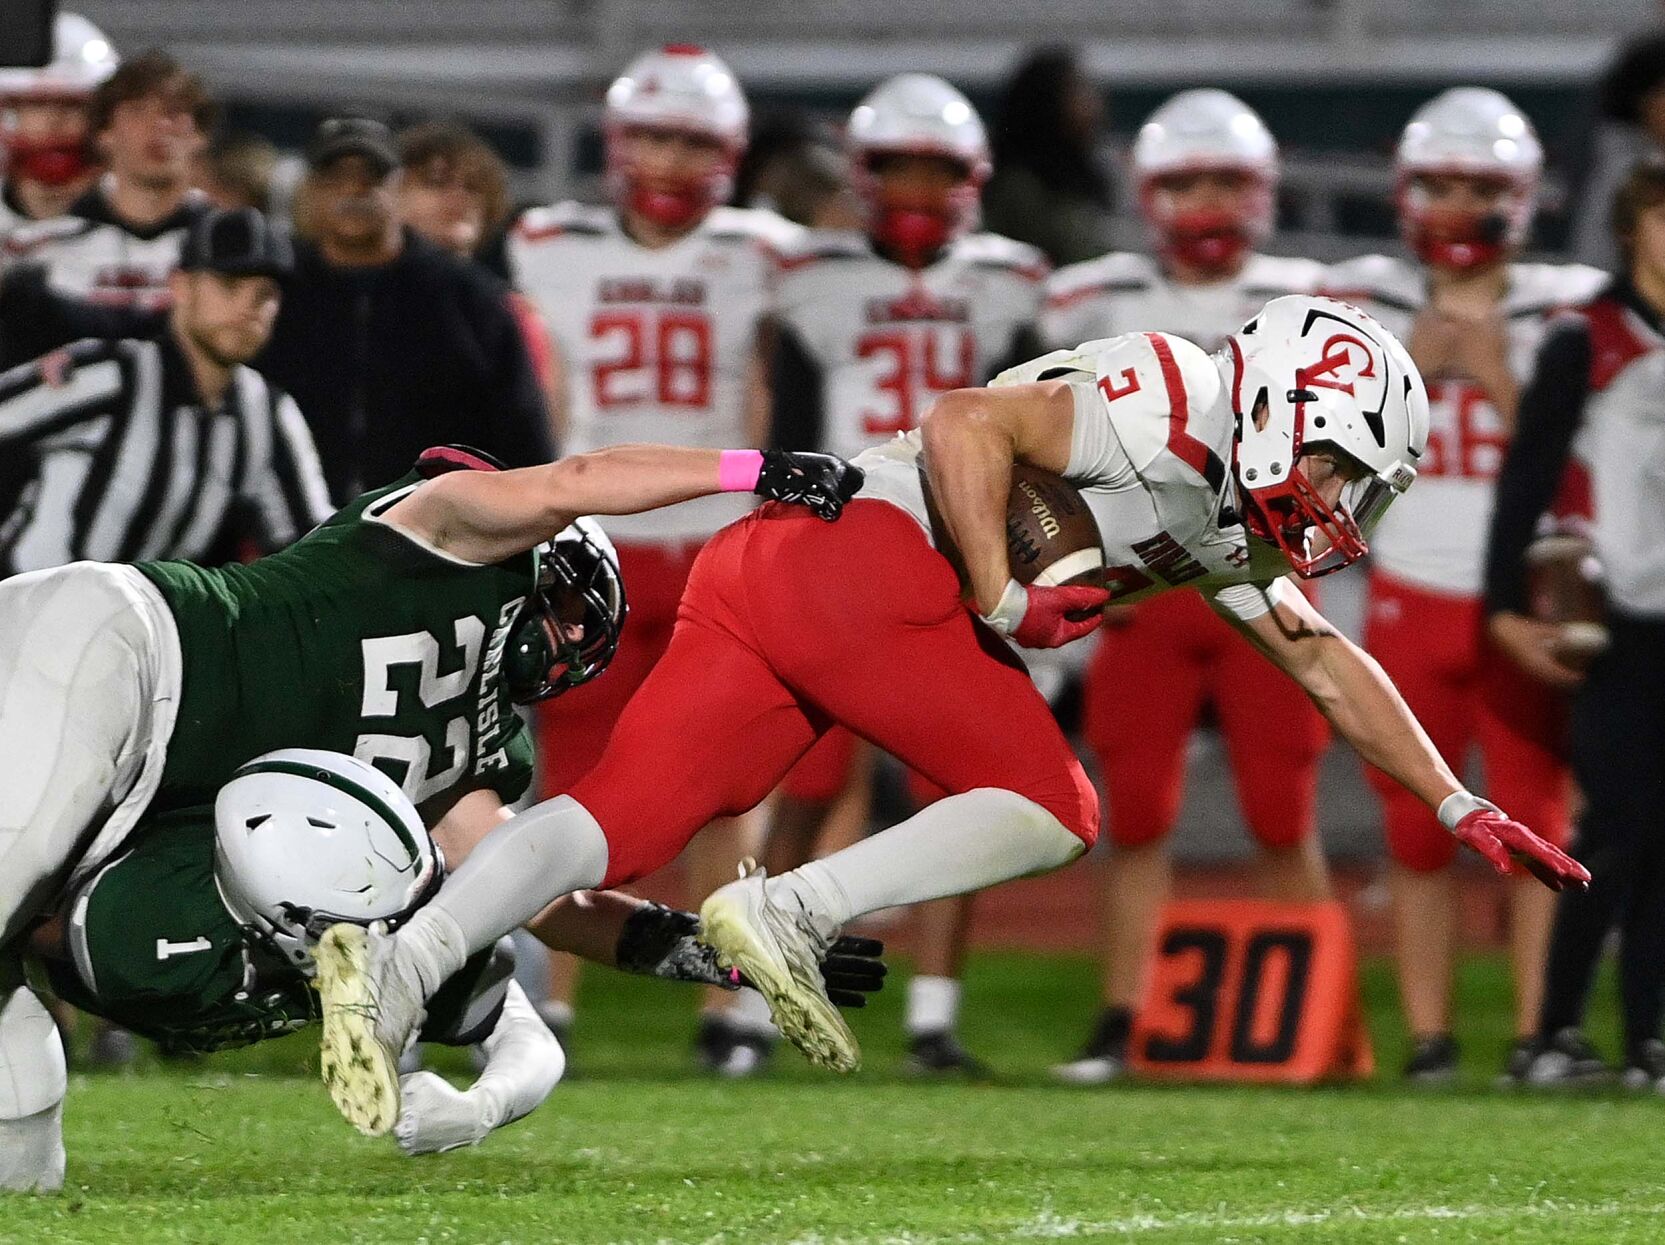 Cumberland Valley lands 3 players on 2023 PFN Coaches Select 6A All-State team